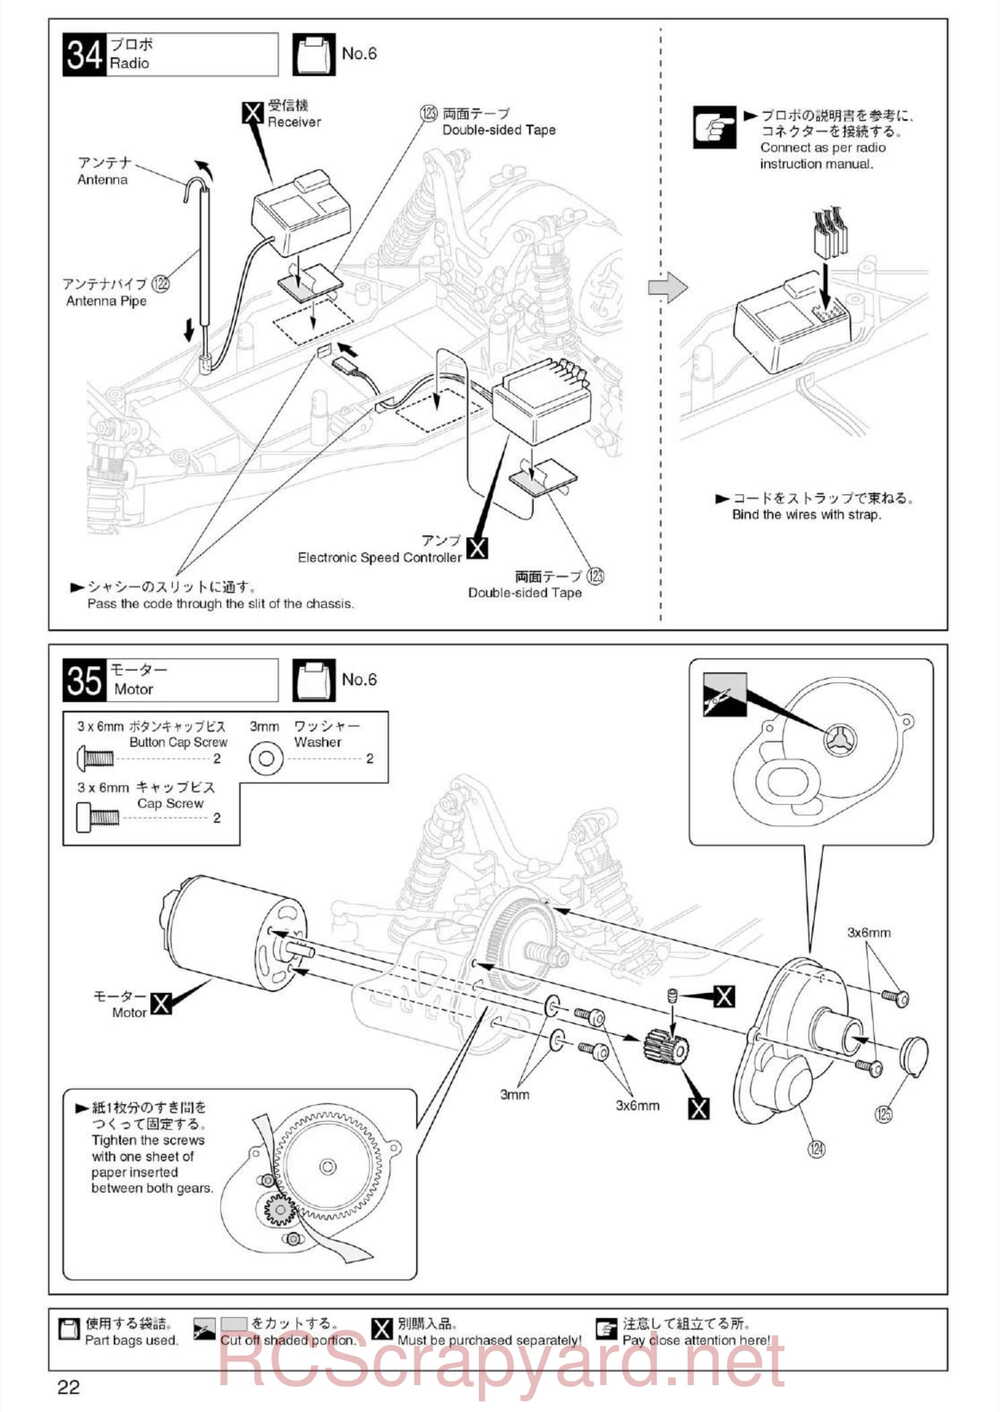 Kyosho - 30074 - Ultima-RB5 - Manual - Page 22